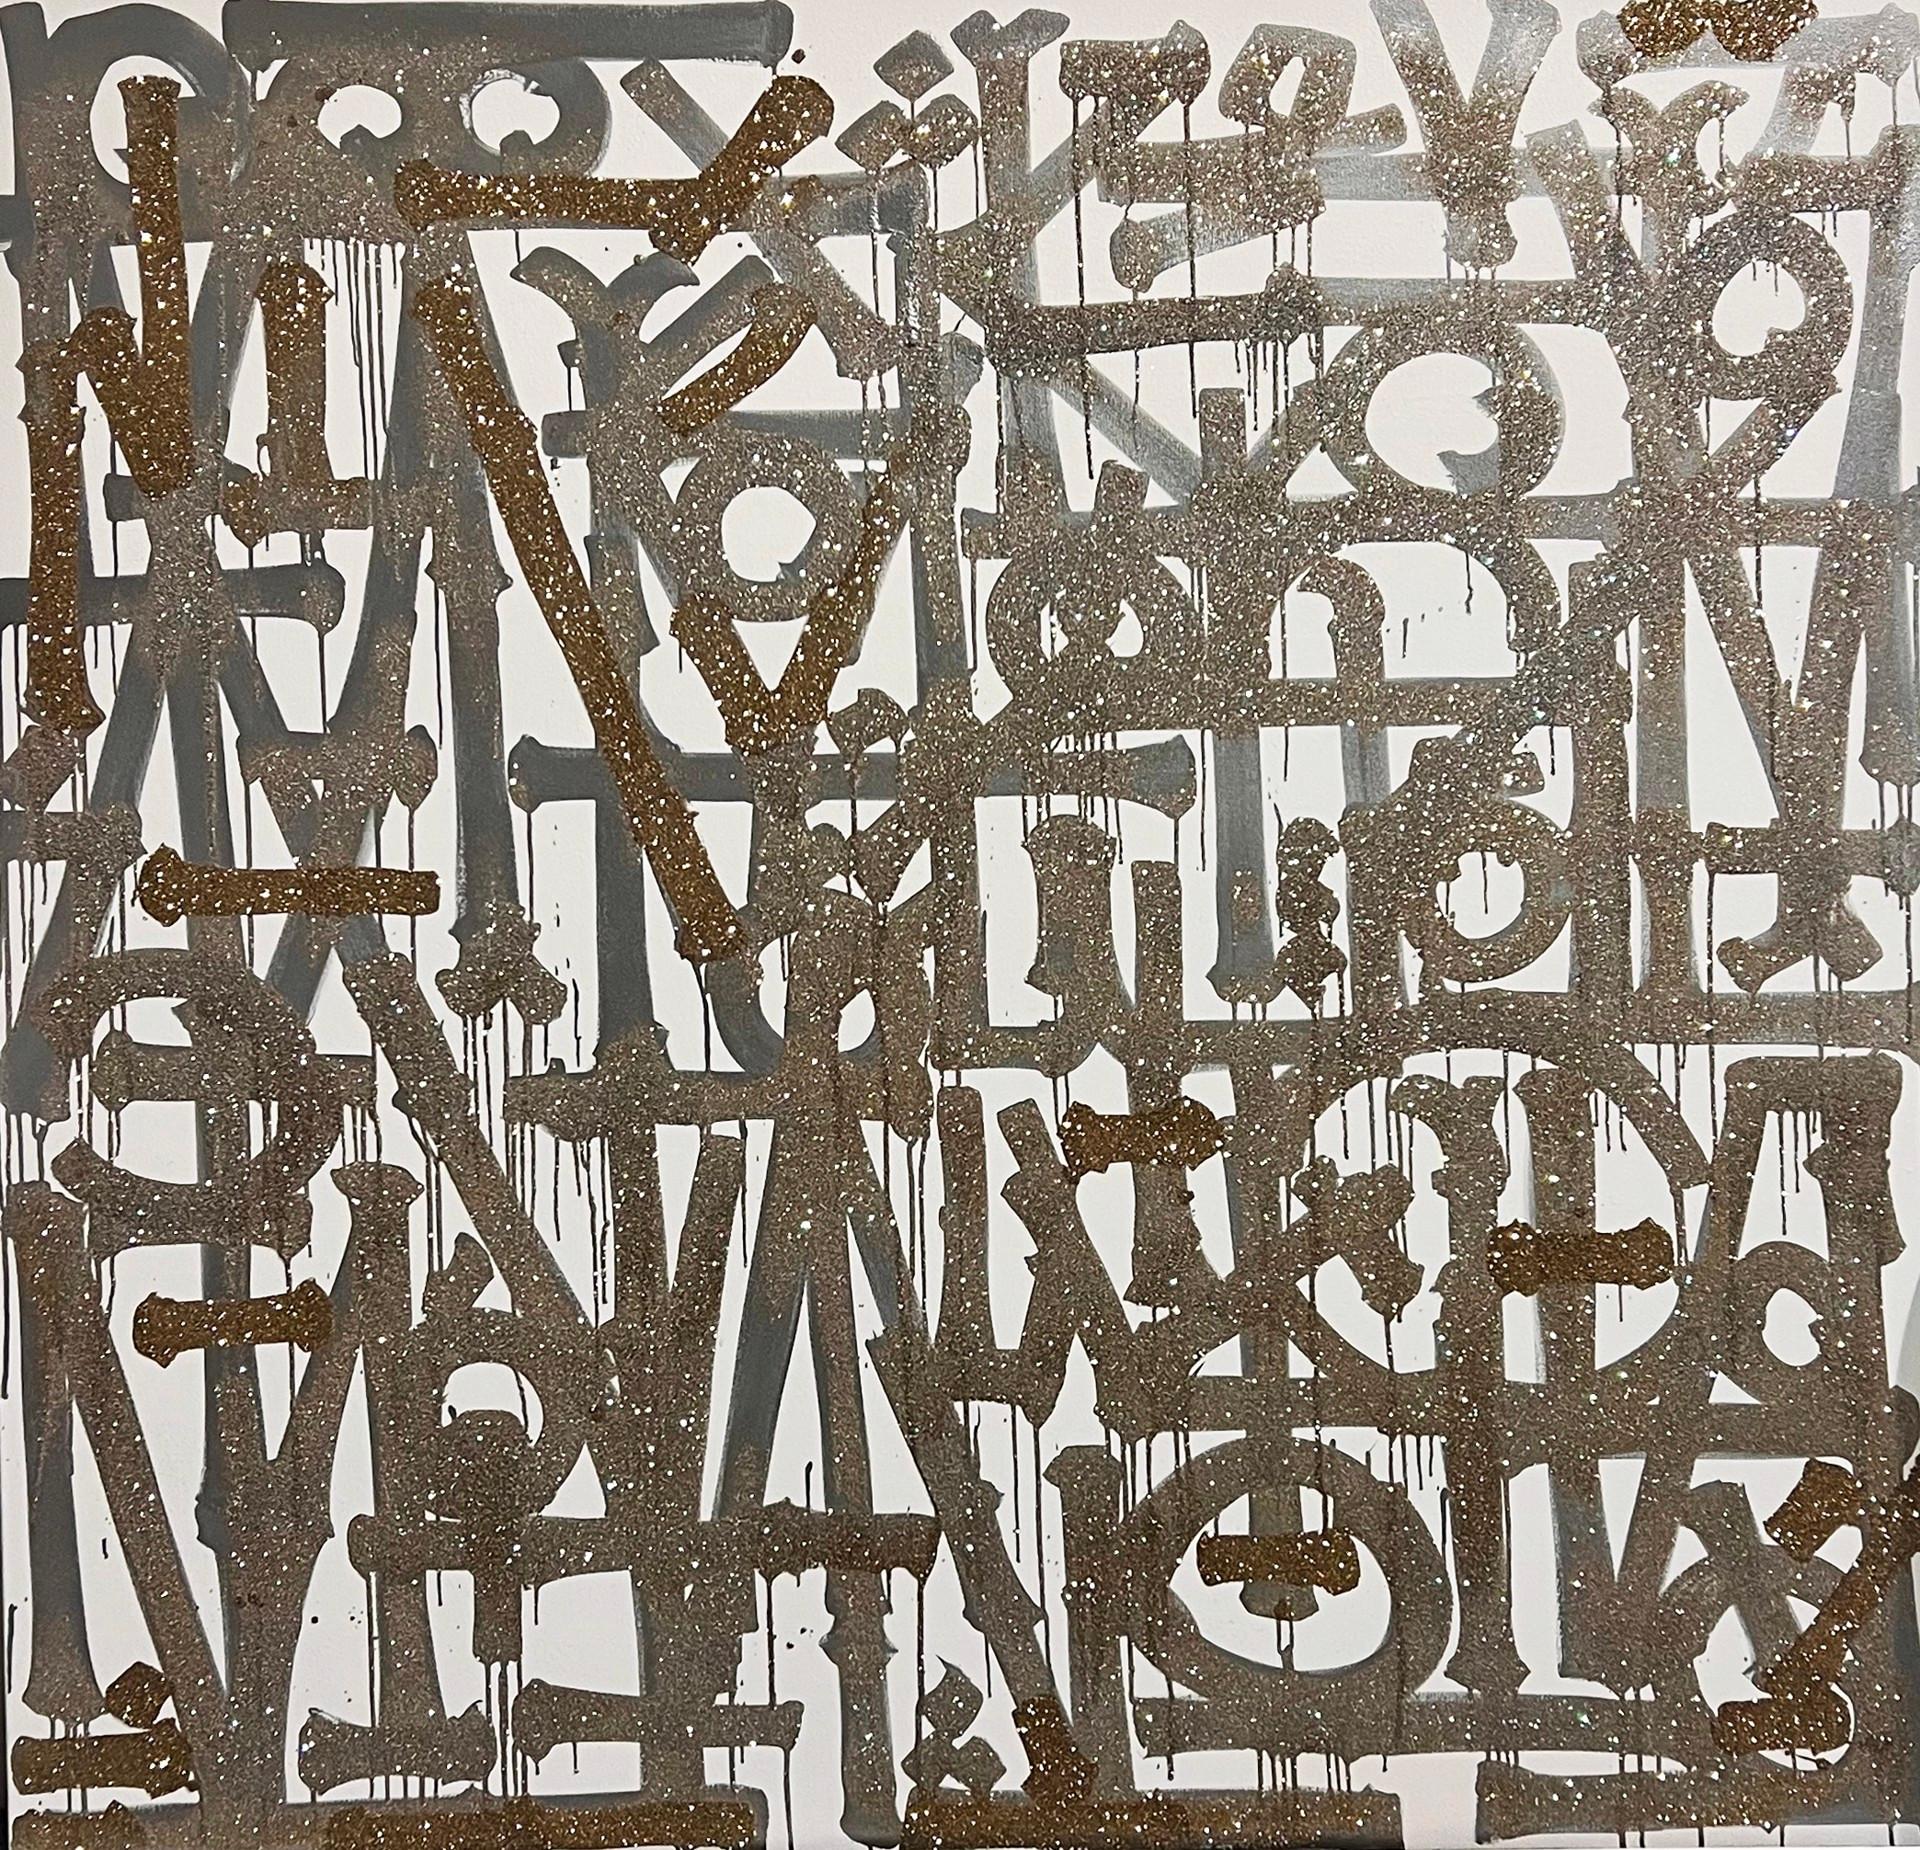 I Love You, Except You - Painting by RETNA